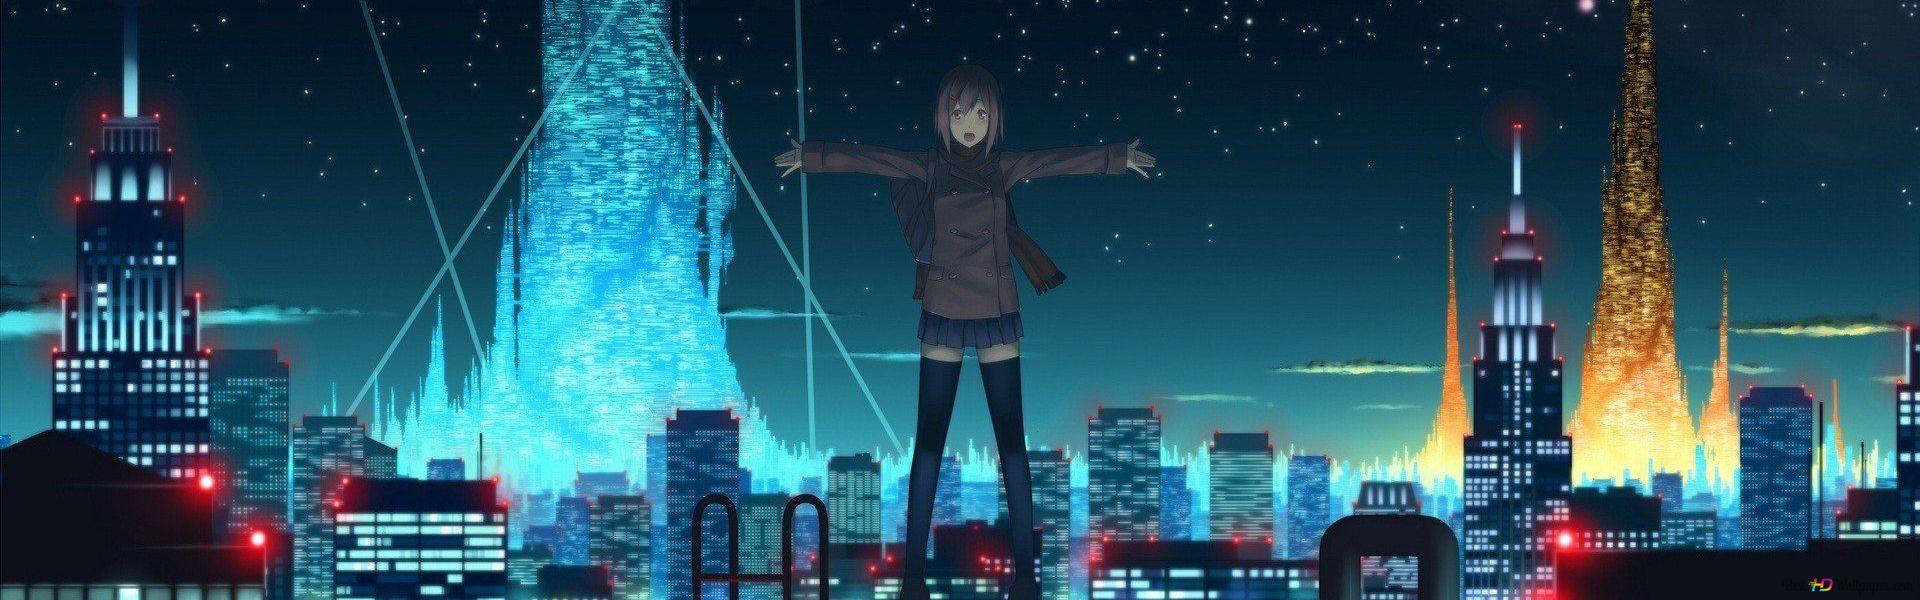 Anime city night sky with a person standing on the edge of it - Blue anime